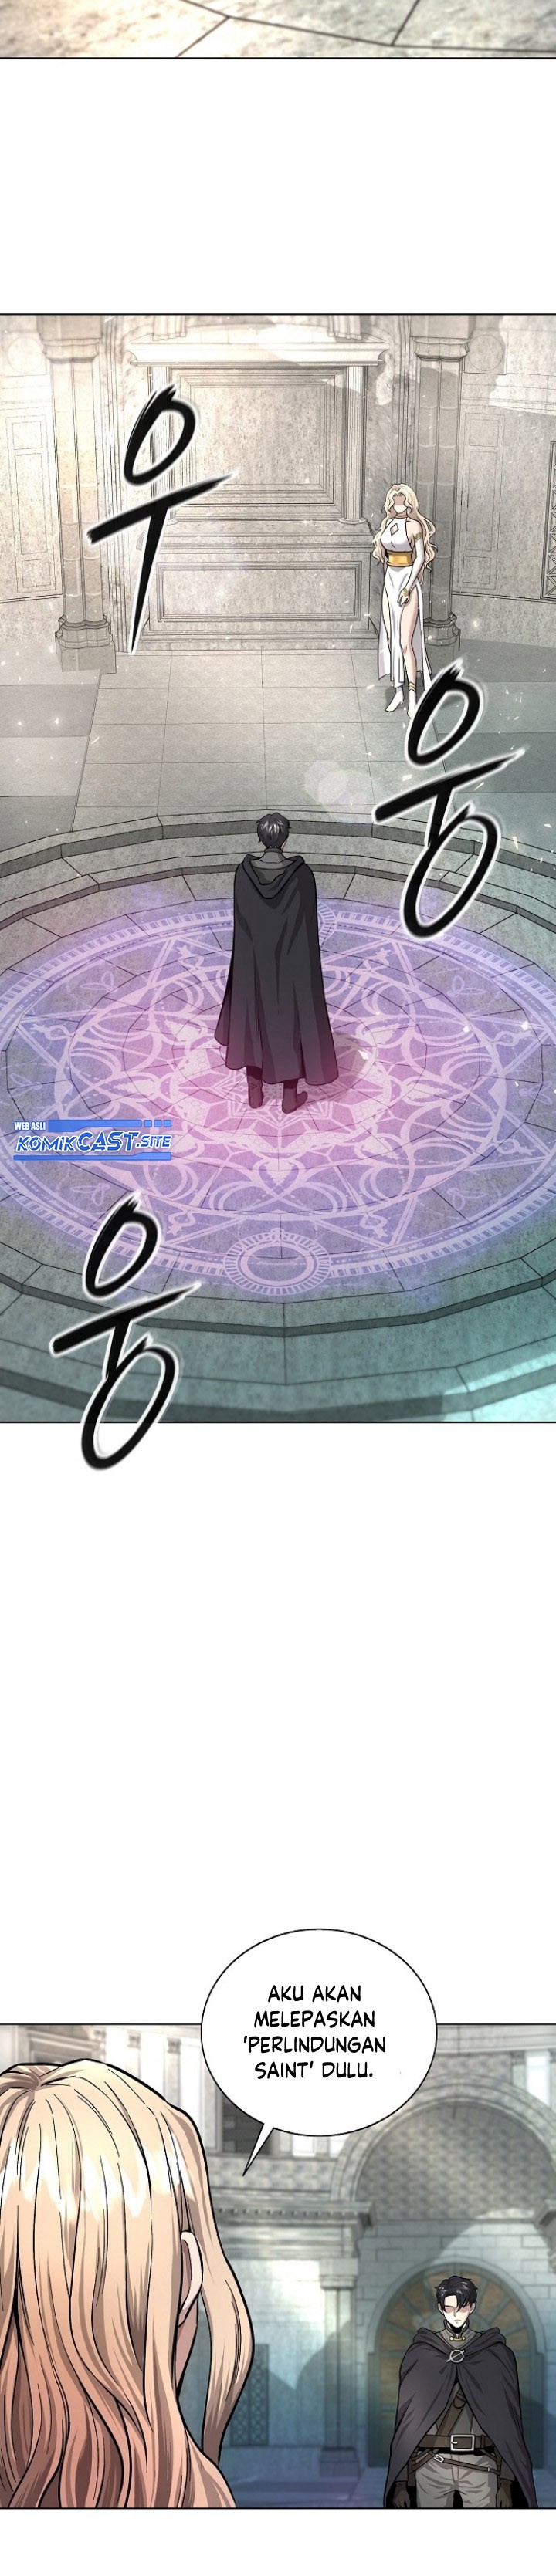 The Dark Mage’s Return to Enlistment Chapter 01